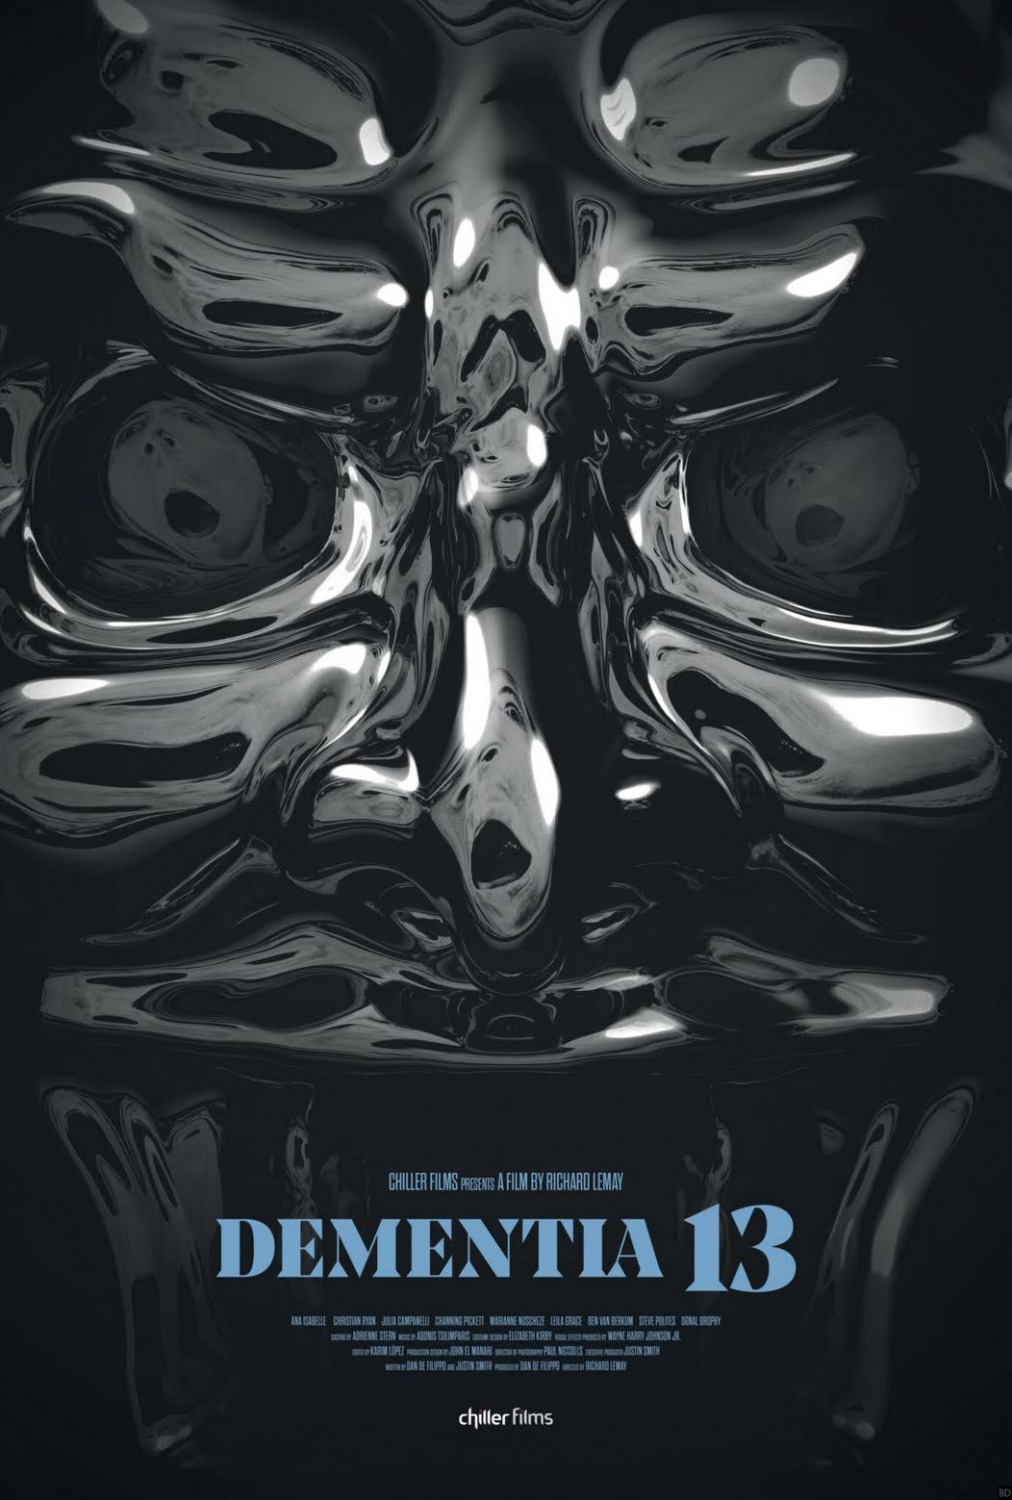 Extra Large Movie Poster Image for Dementia 13 